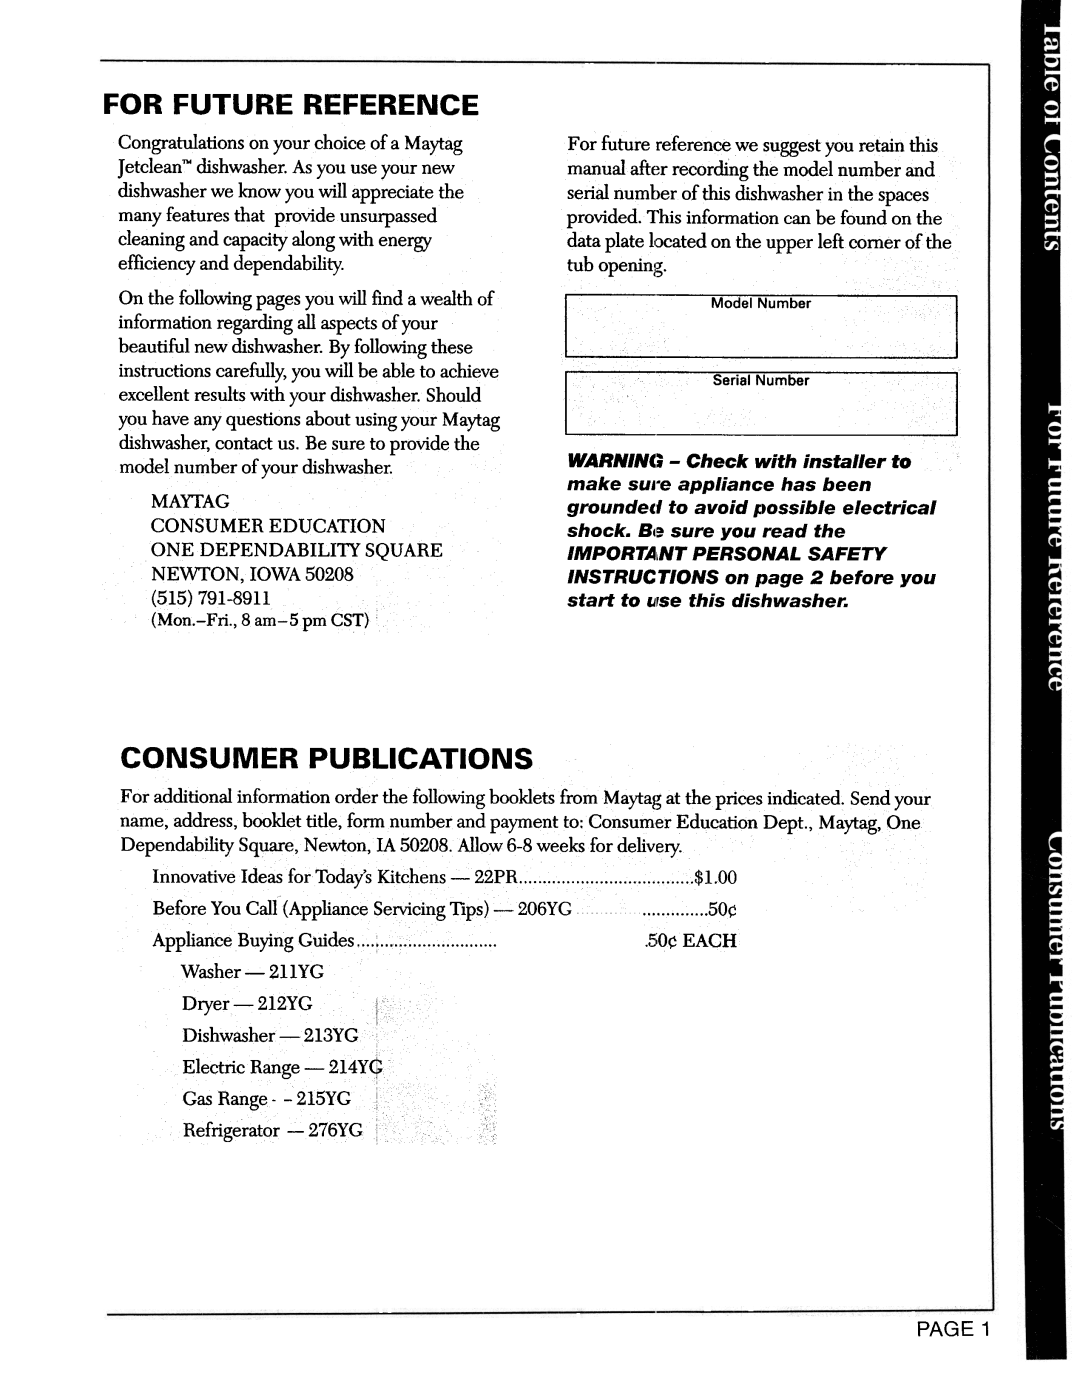 Maytag DWC8330, DWU8330 manual For Future Reference, Consumer Publications 